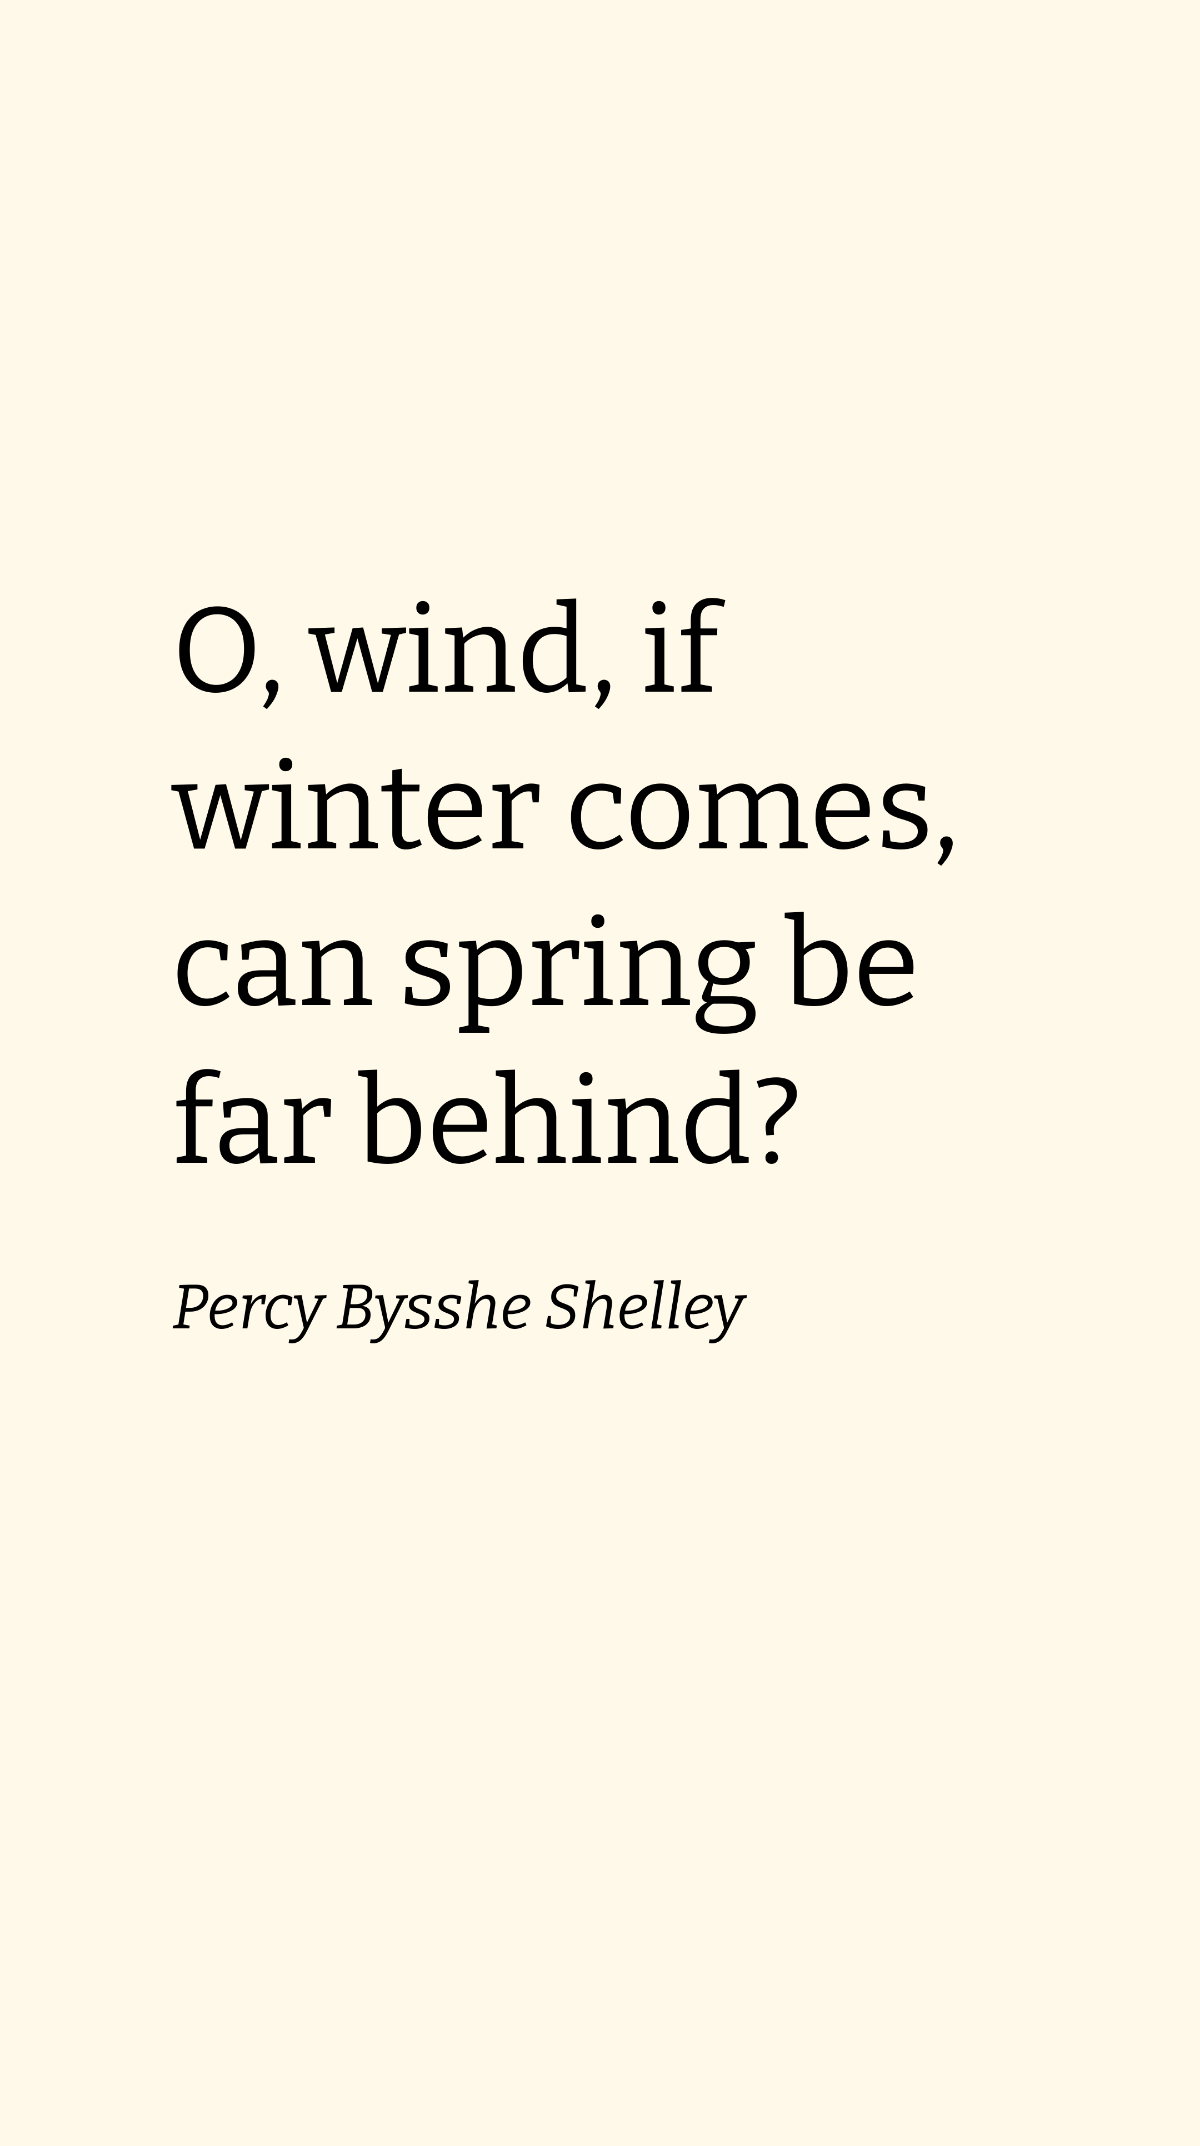 Percy Bysshe Shelley - O, wind, if winter comes, can spring be far behind? Template